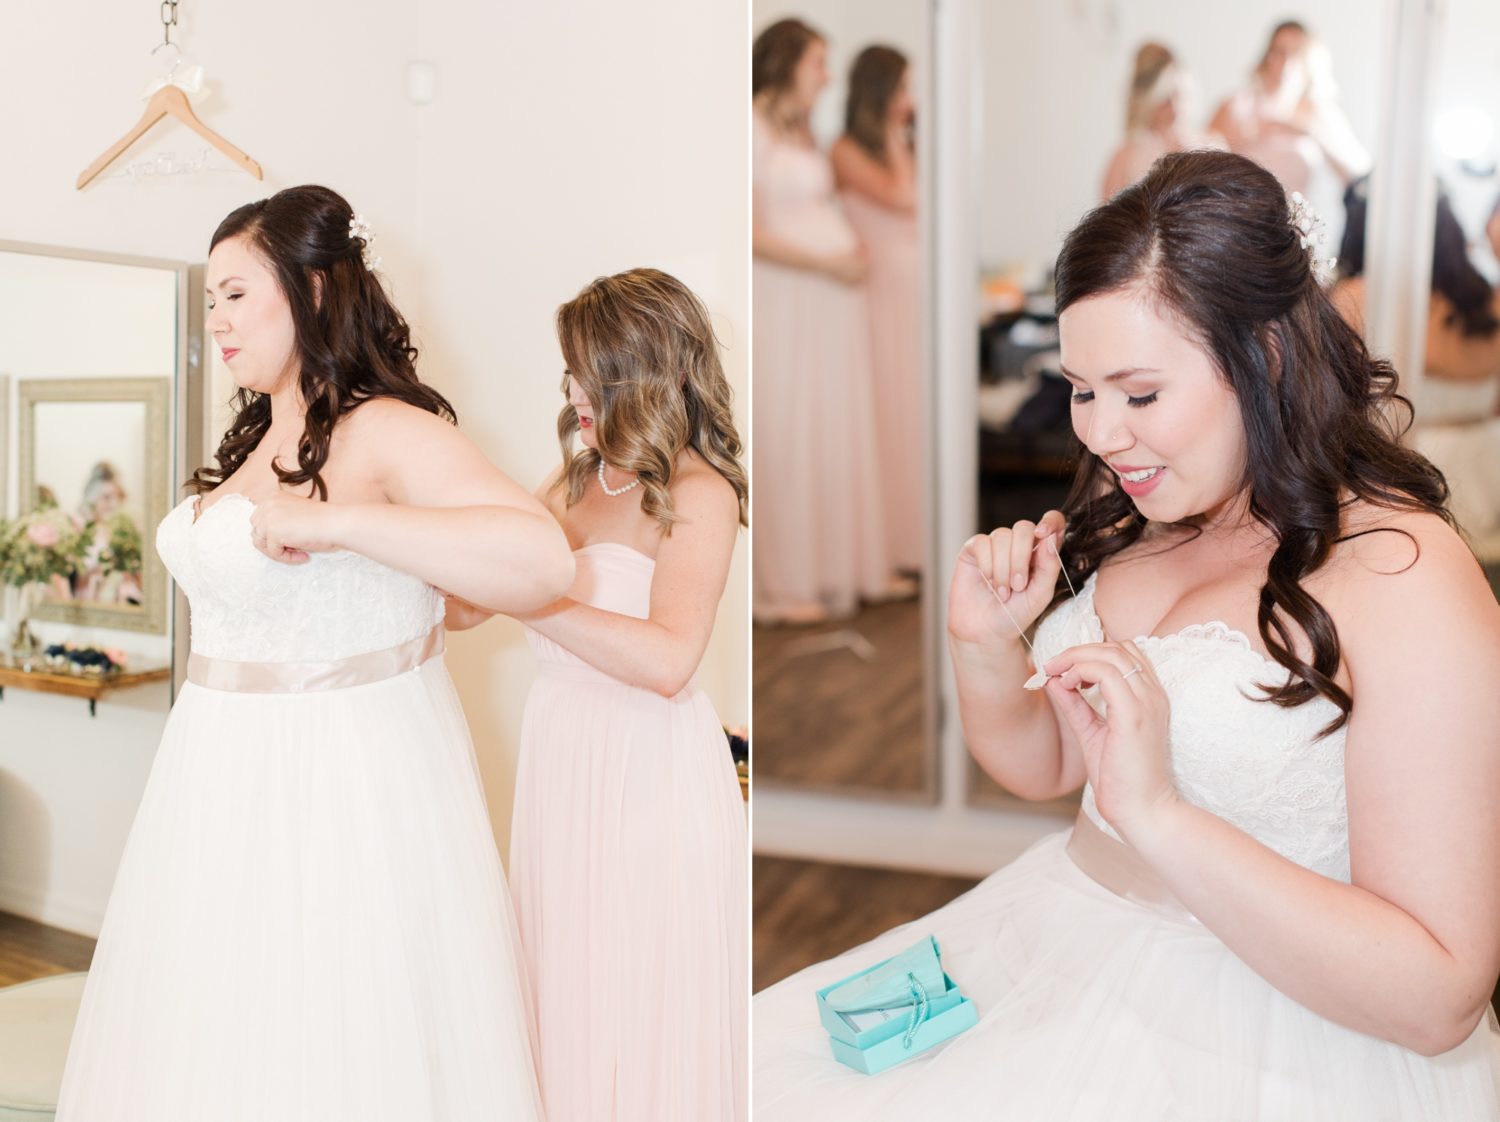 Bride getting ready pictures at The Paseo venue